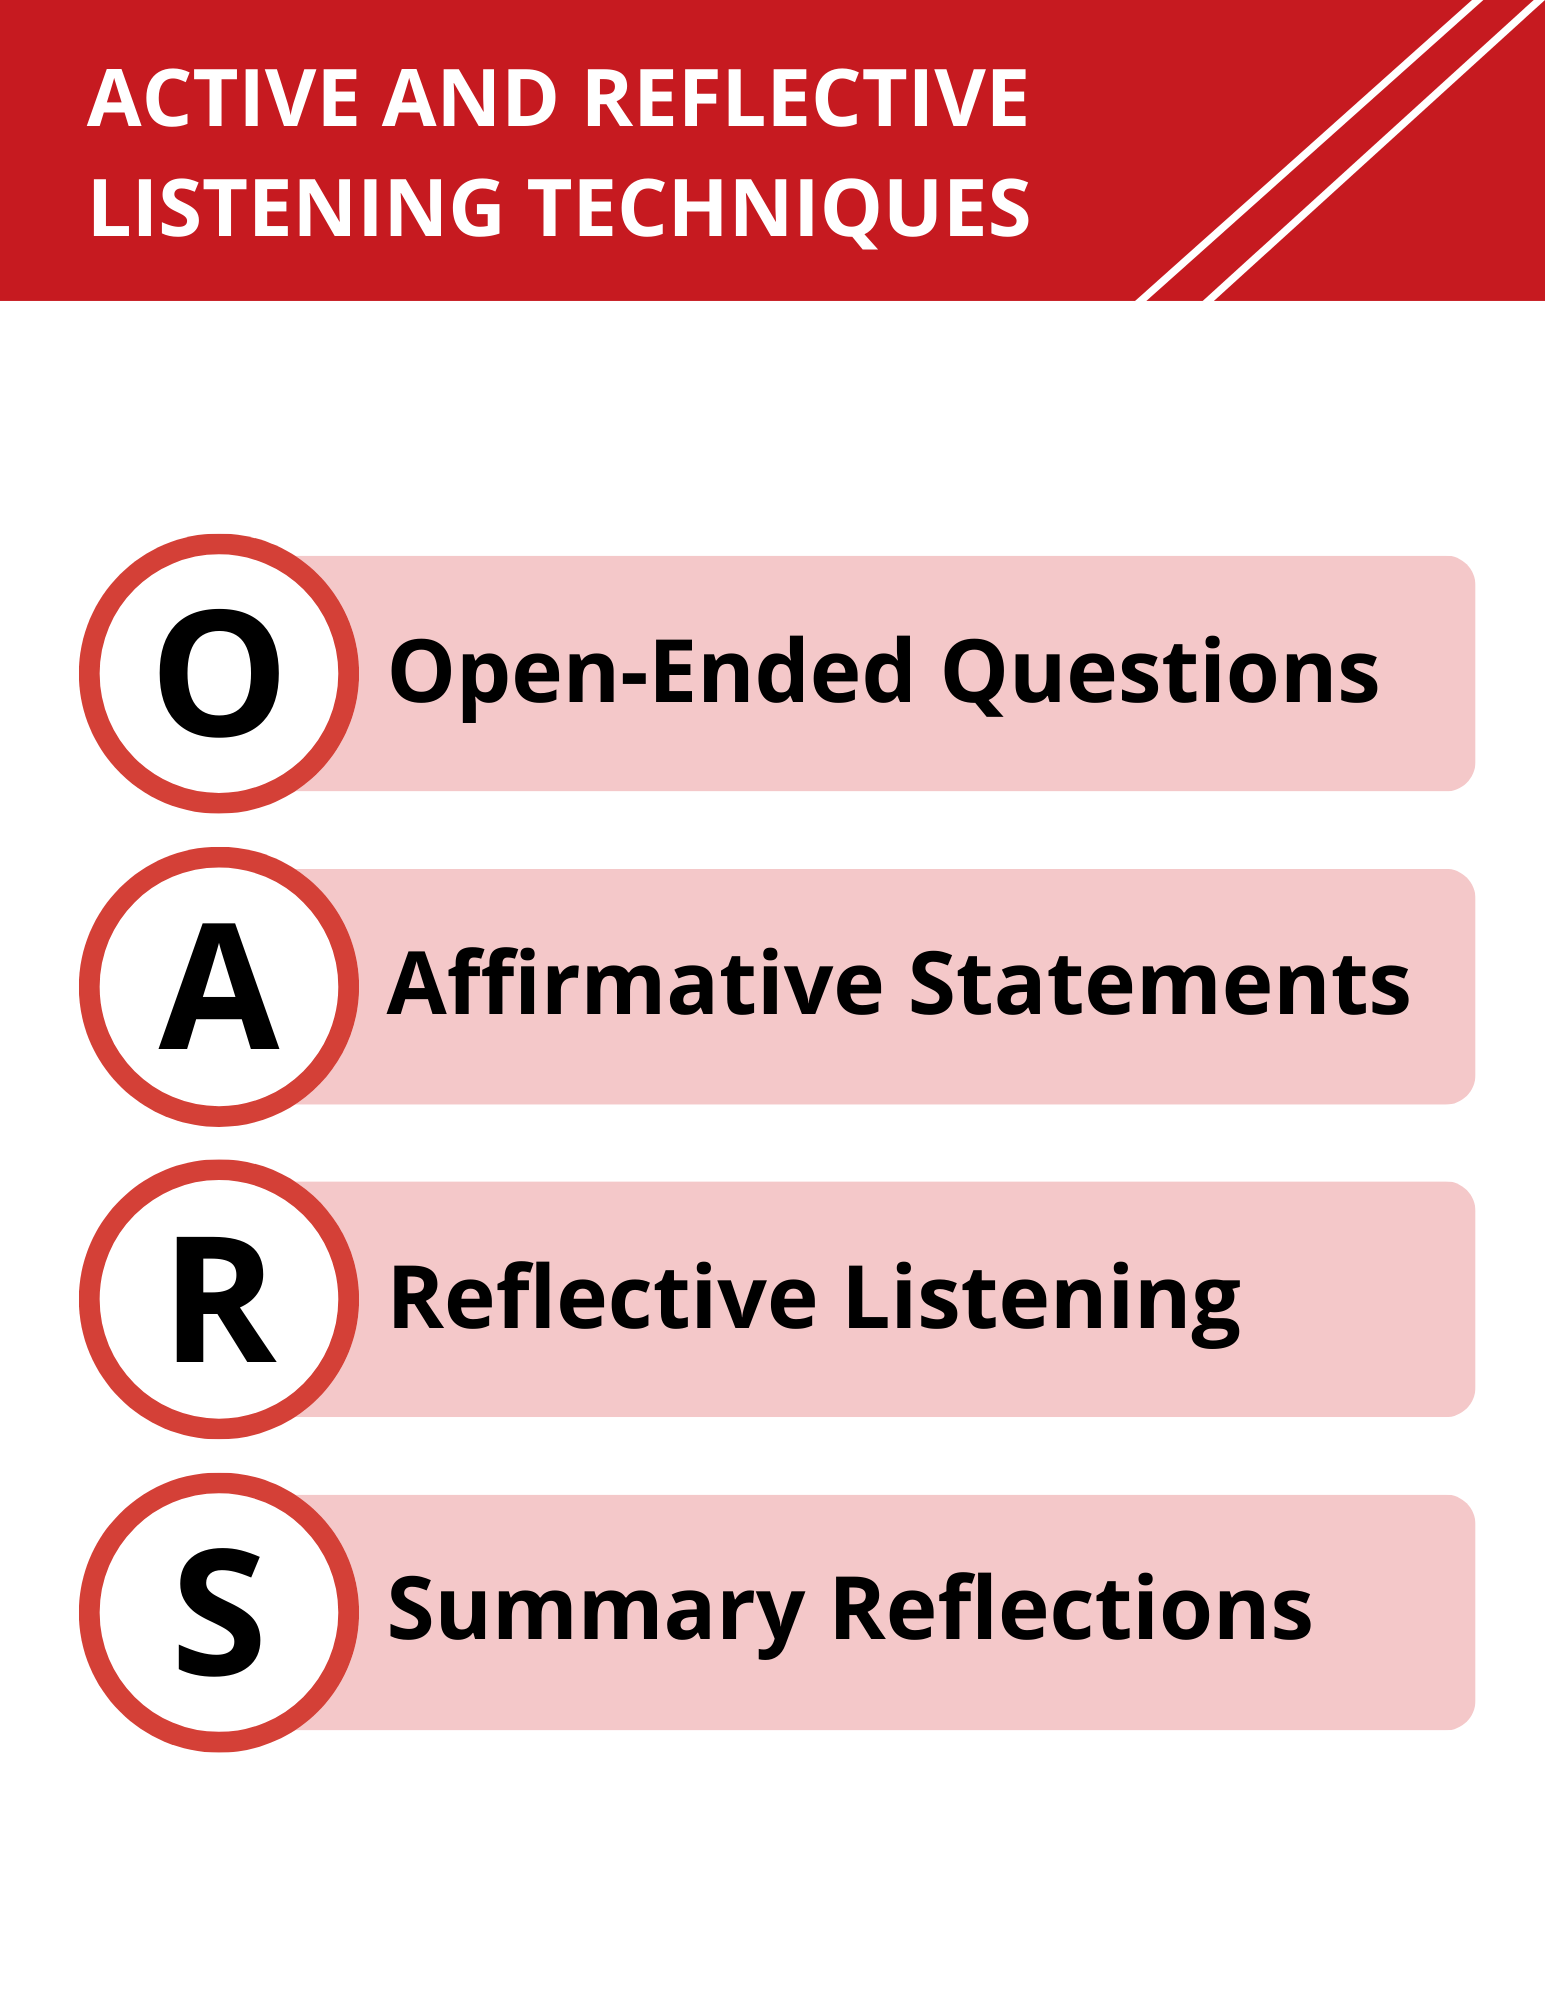 Tools to use for reflective listening.